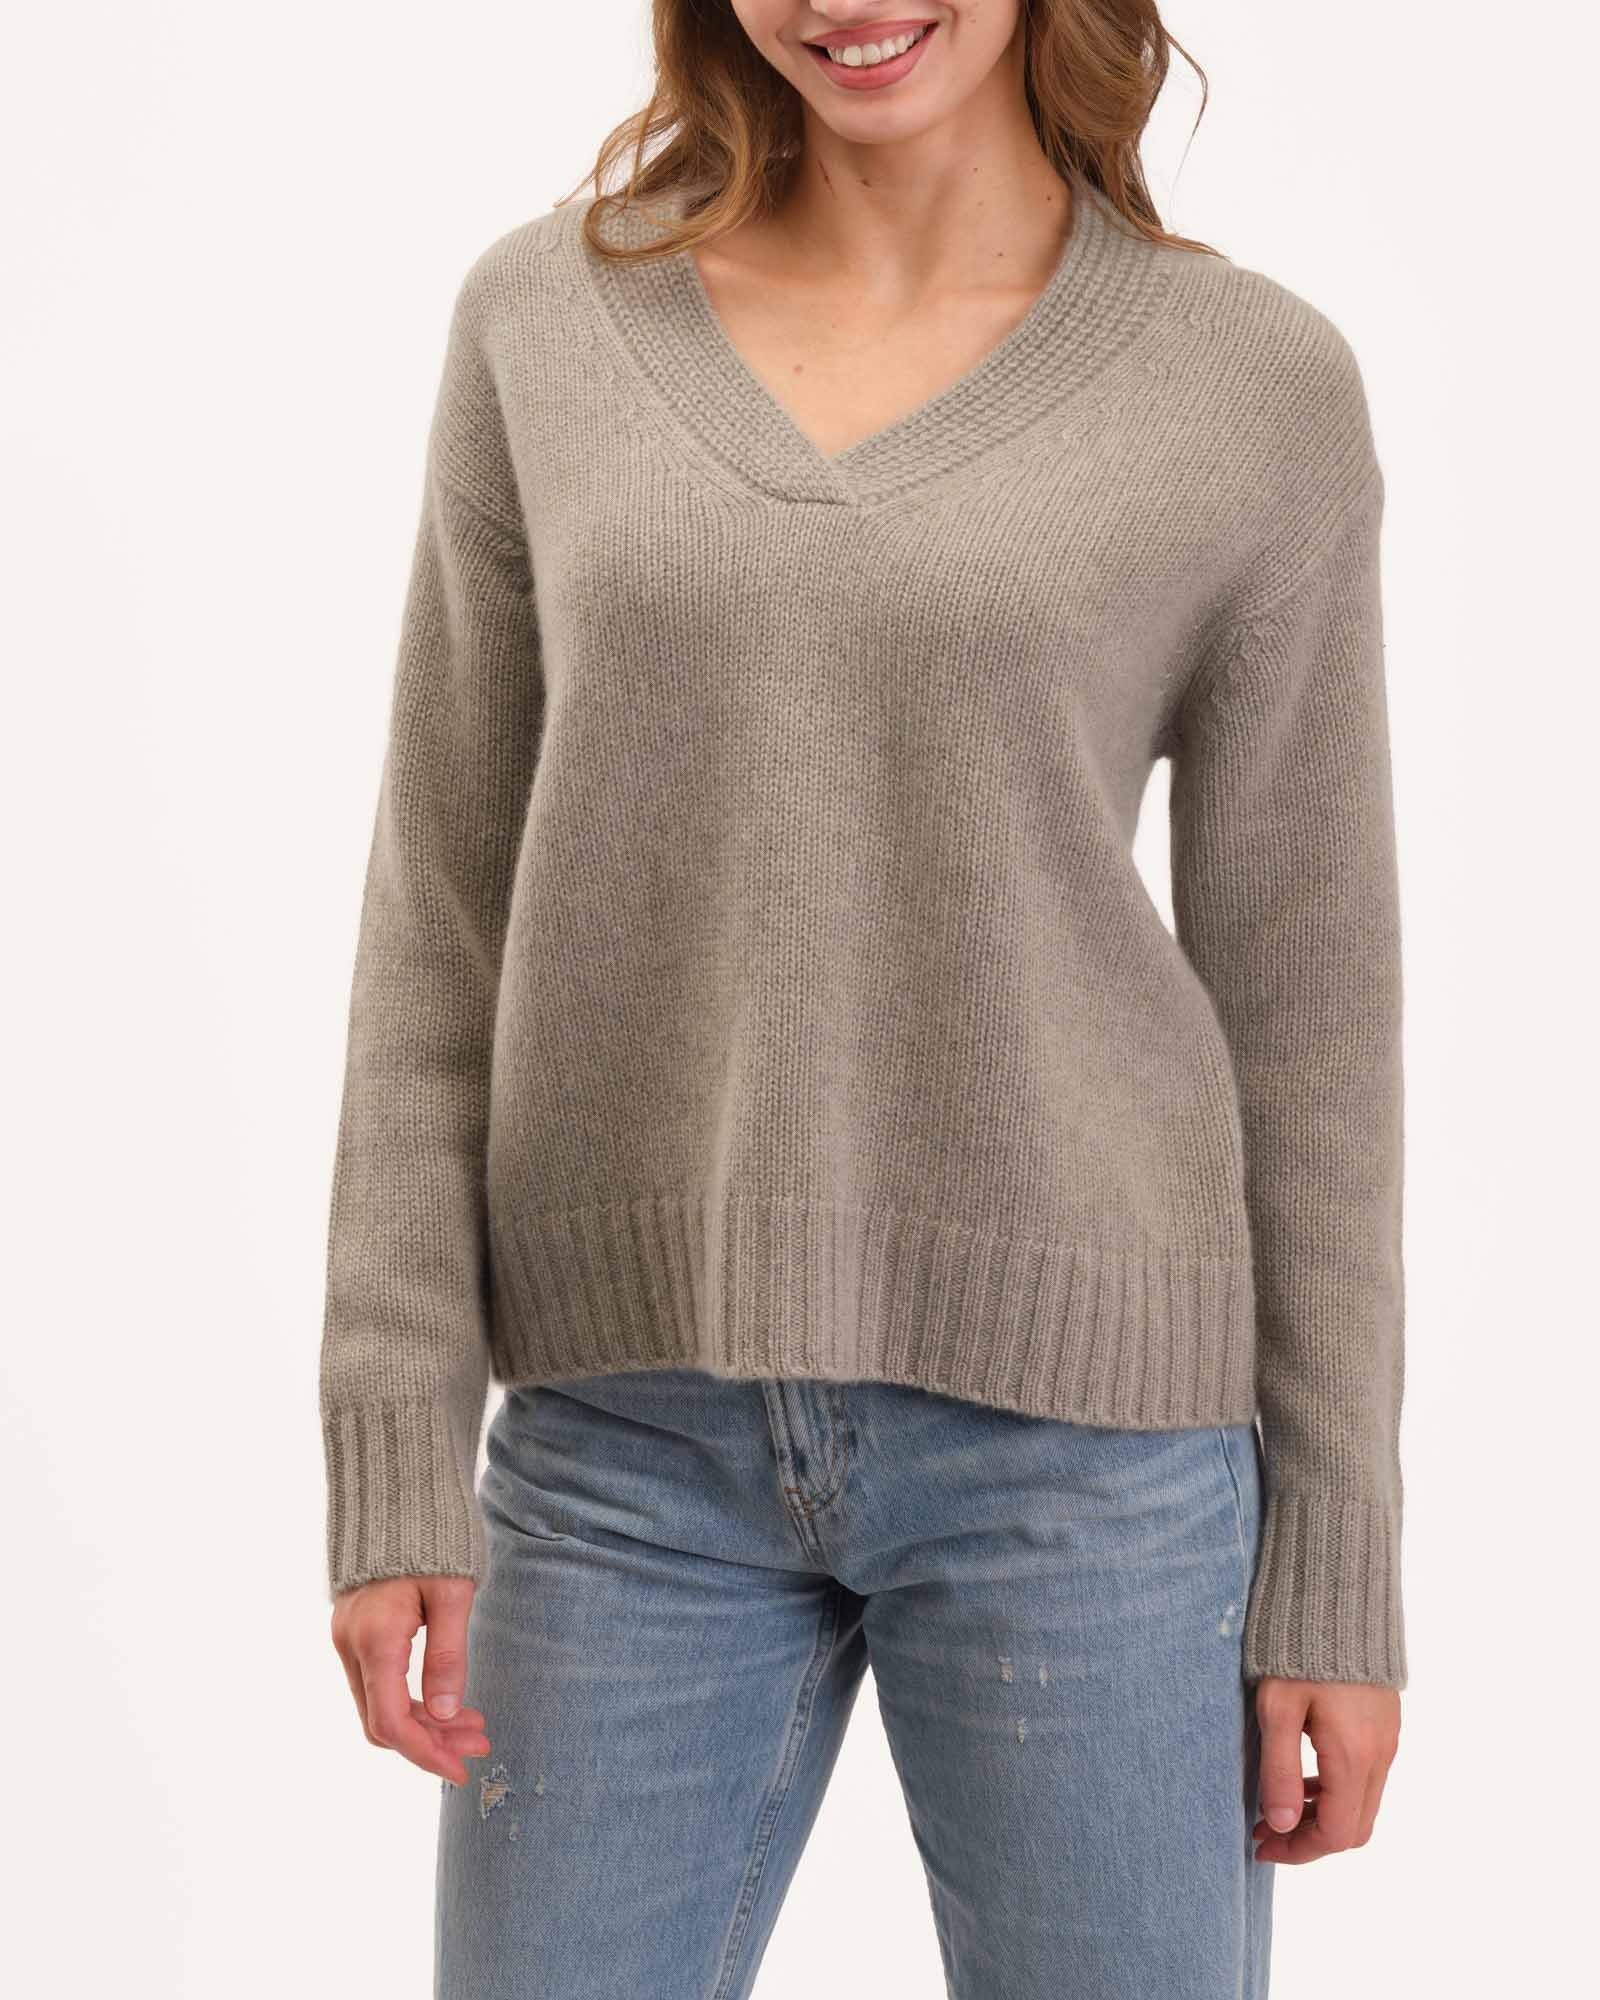 The $50 Cashmere V-Neck Sweater | Quince